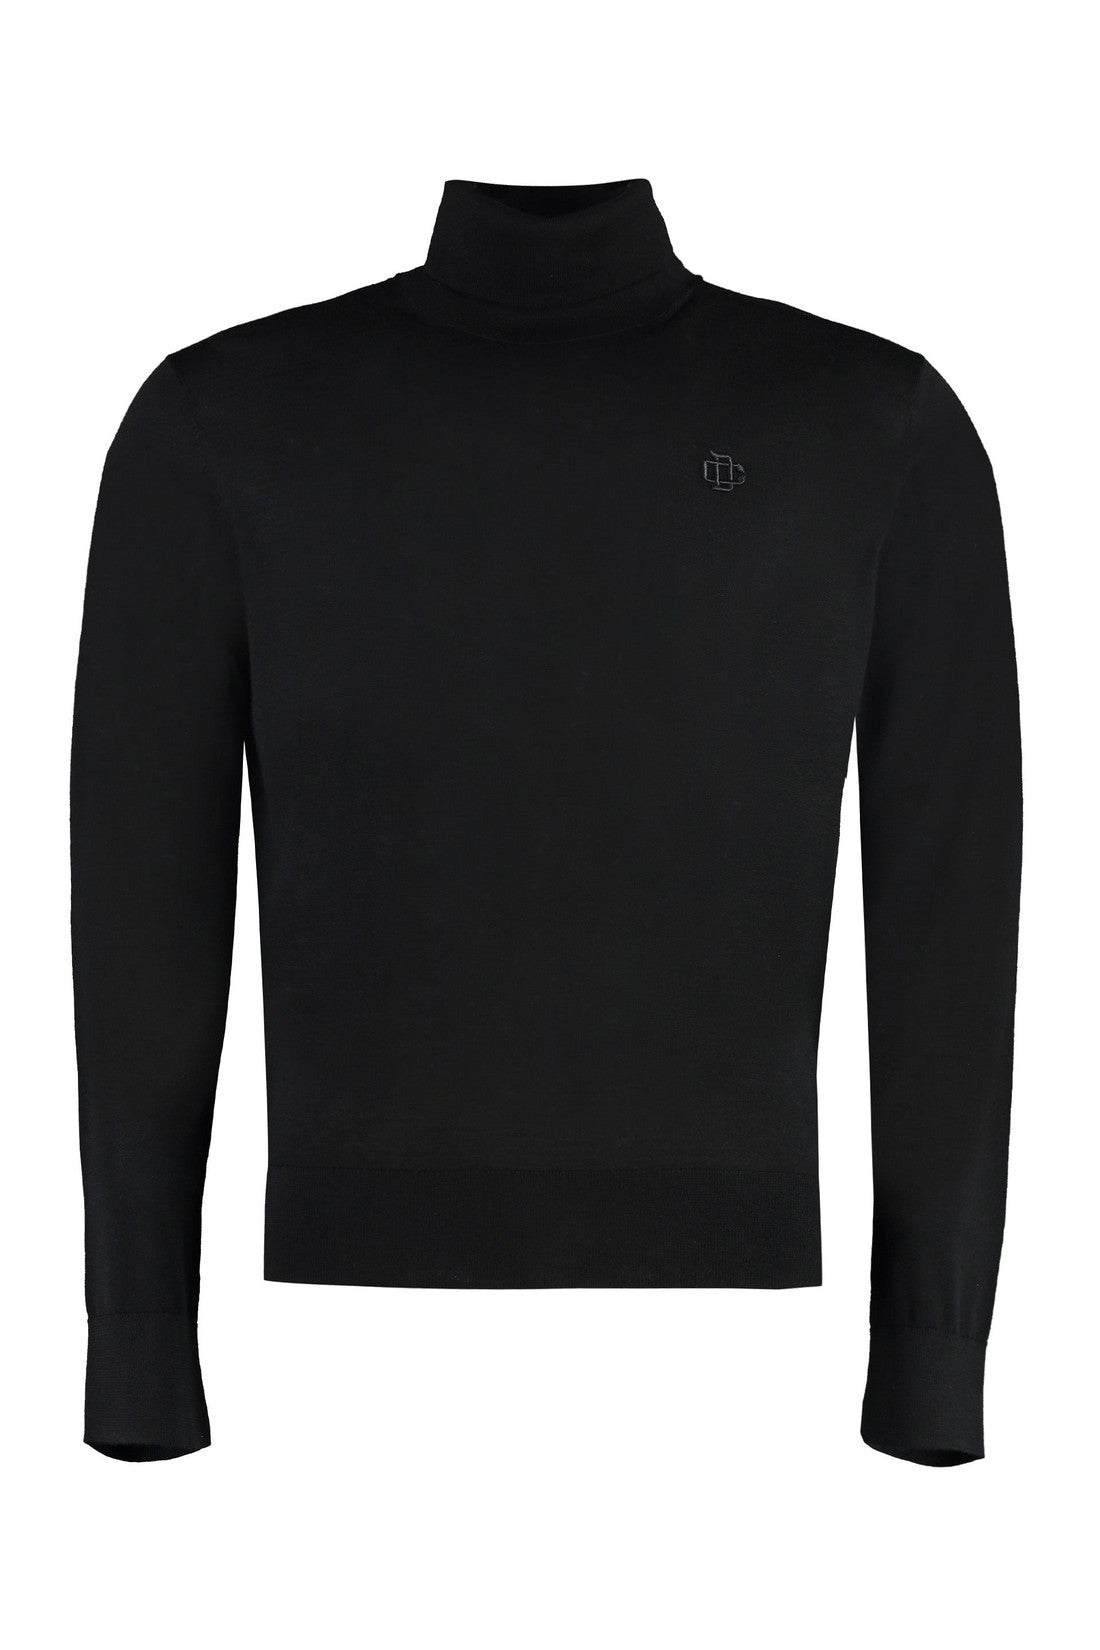 Dsquared2-OUTLET-SALE-Turtleneck merino wool sweater-ARCHIVIST